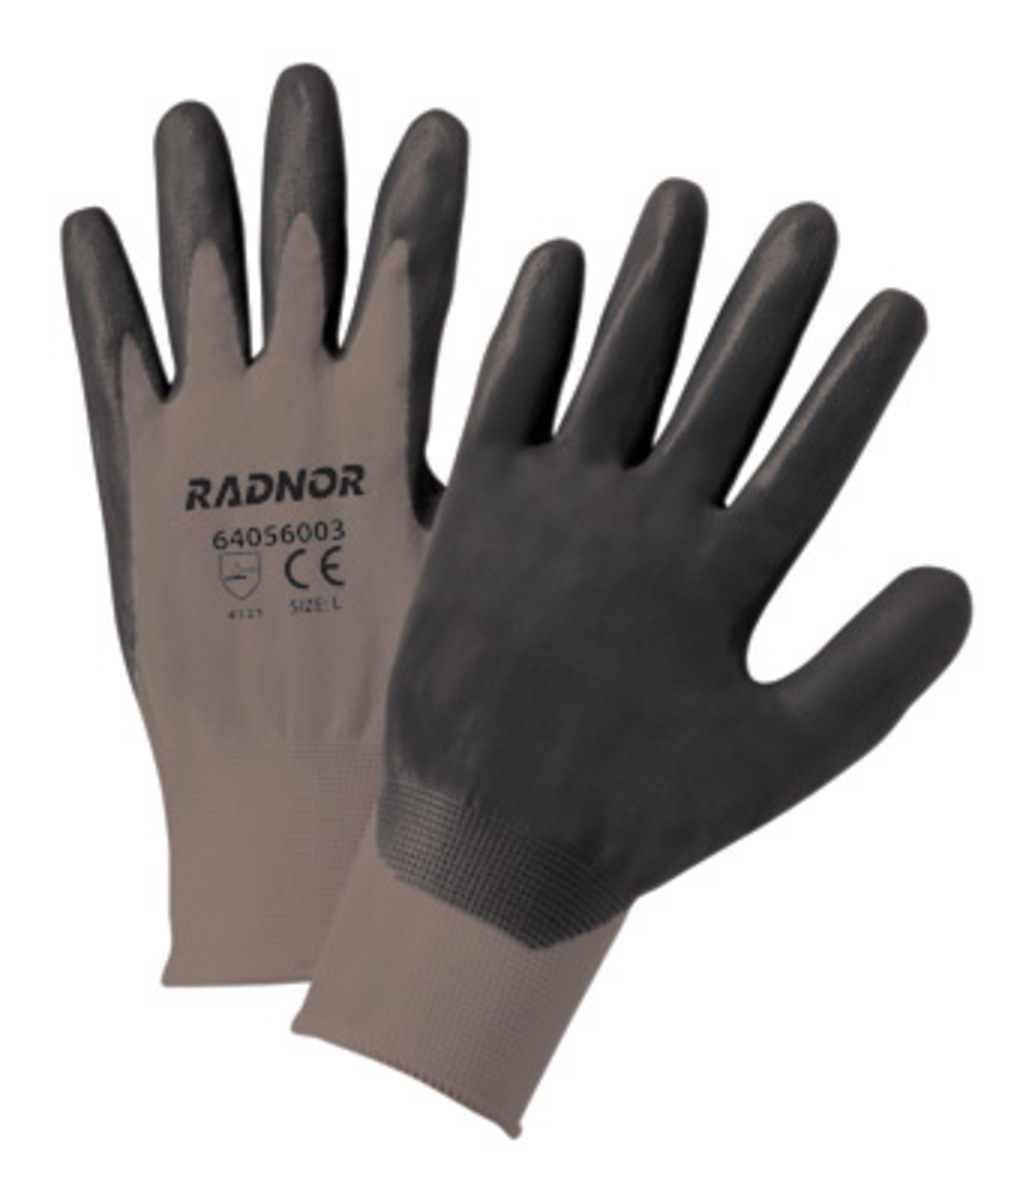 Radnor Large Black Foam Nitrile Palm Coated Gloves with 13 Gauge Gray Seamless Nylon Liner